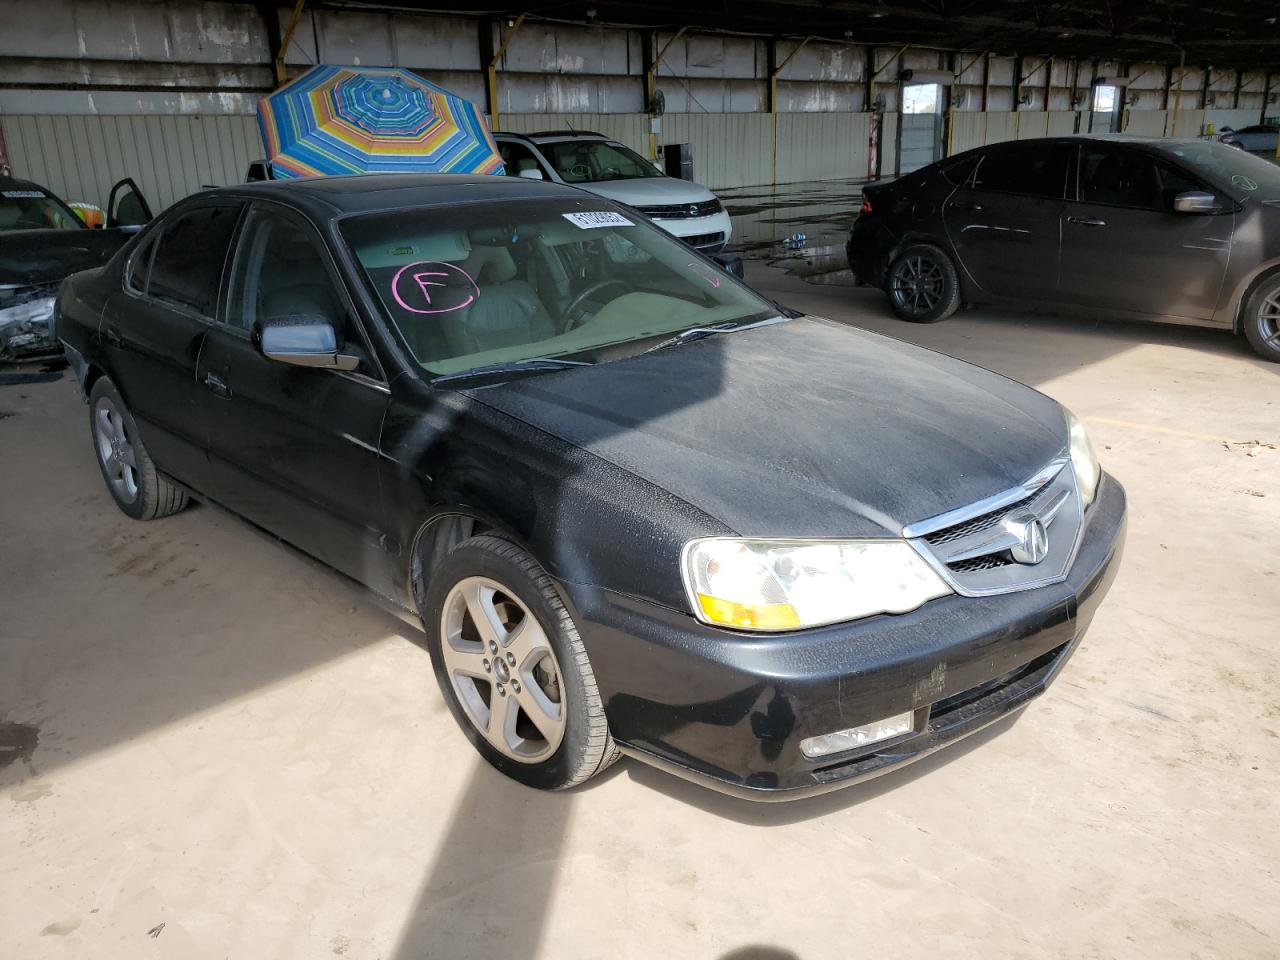 2003 ACURA 3.2TL TYPE-S VIN: 19UUA56803A074043